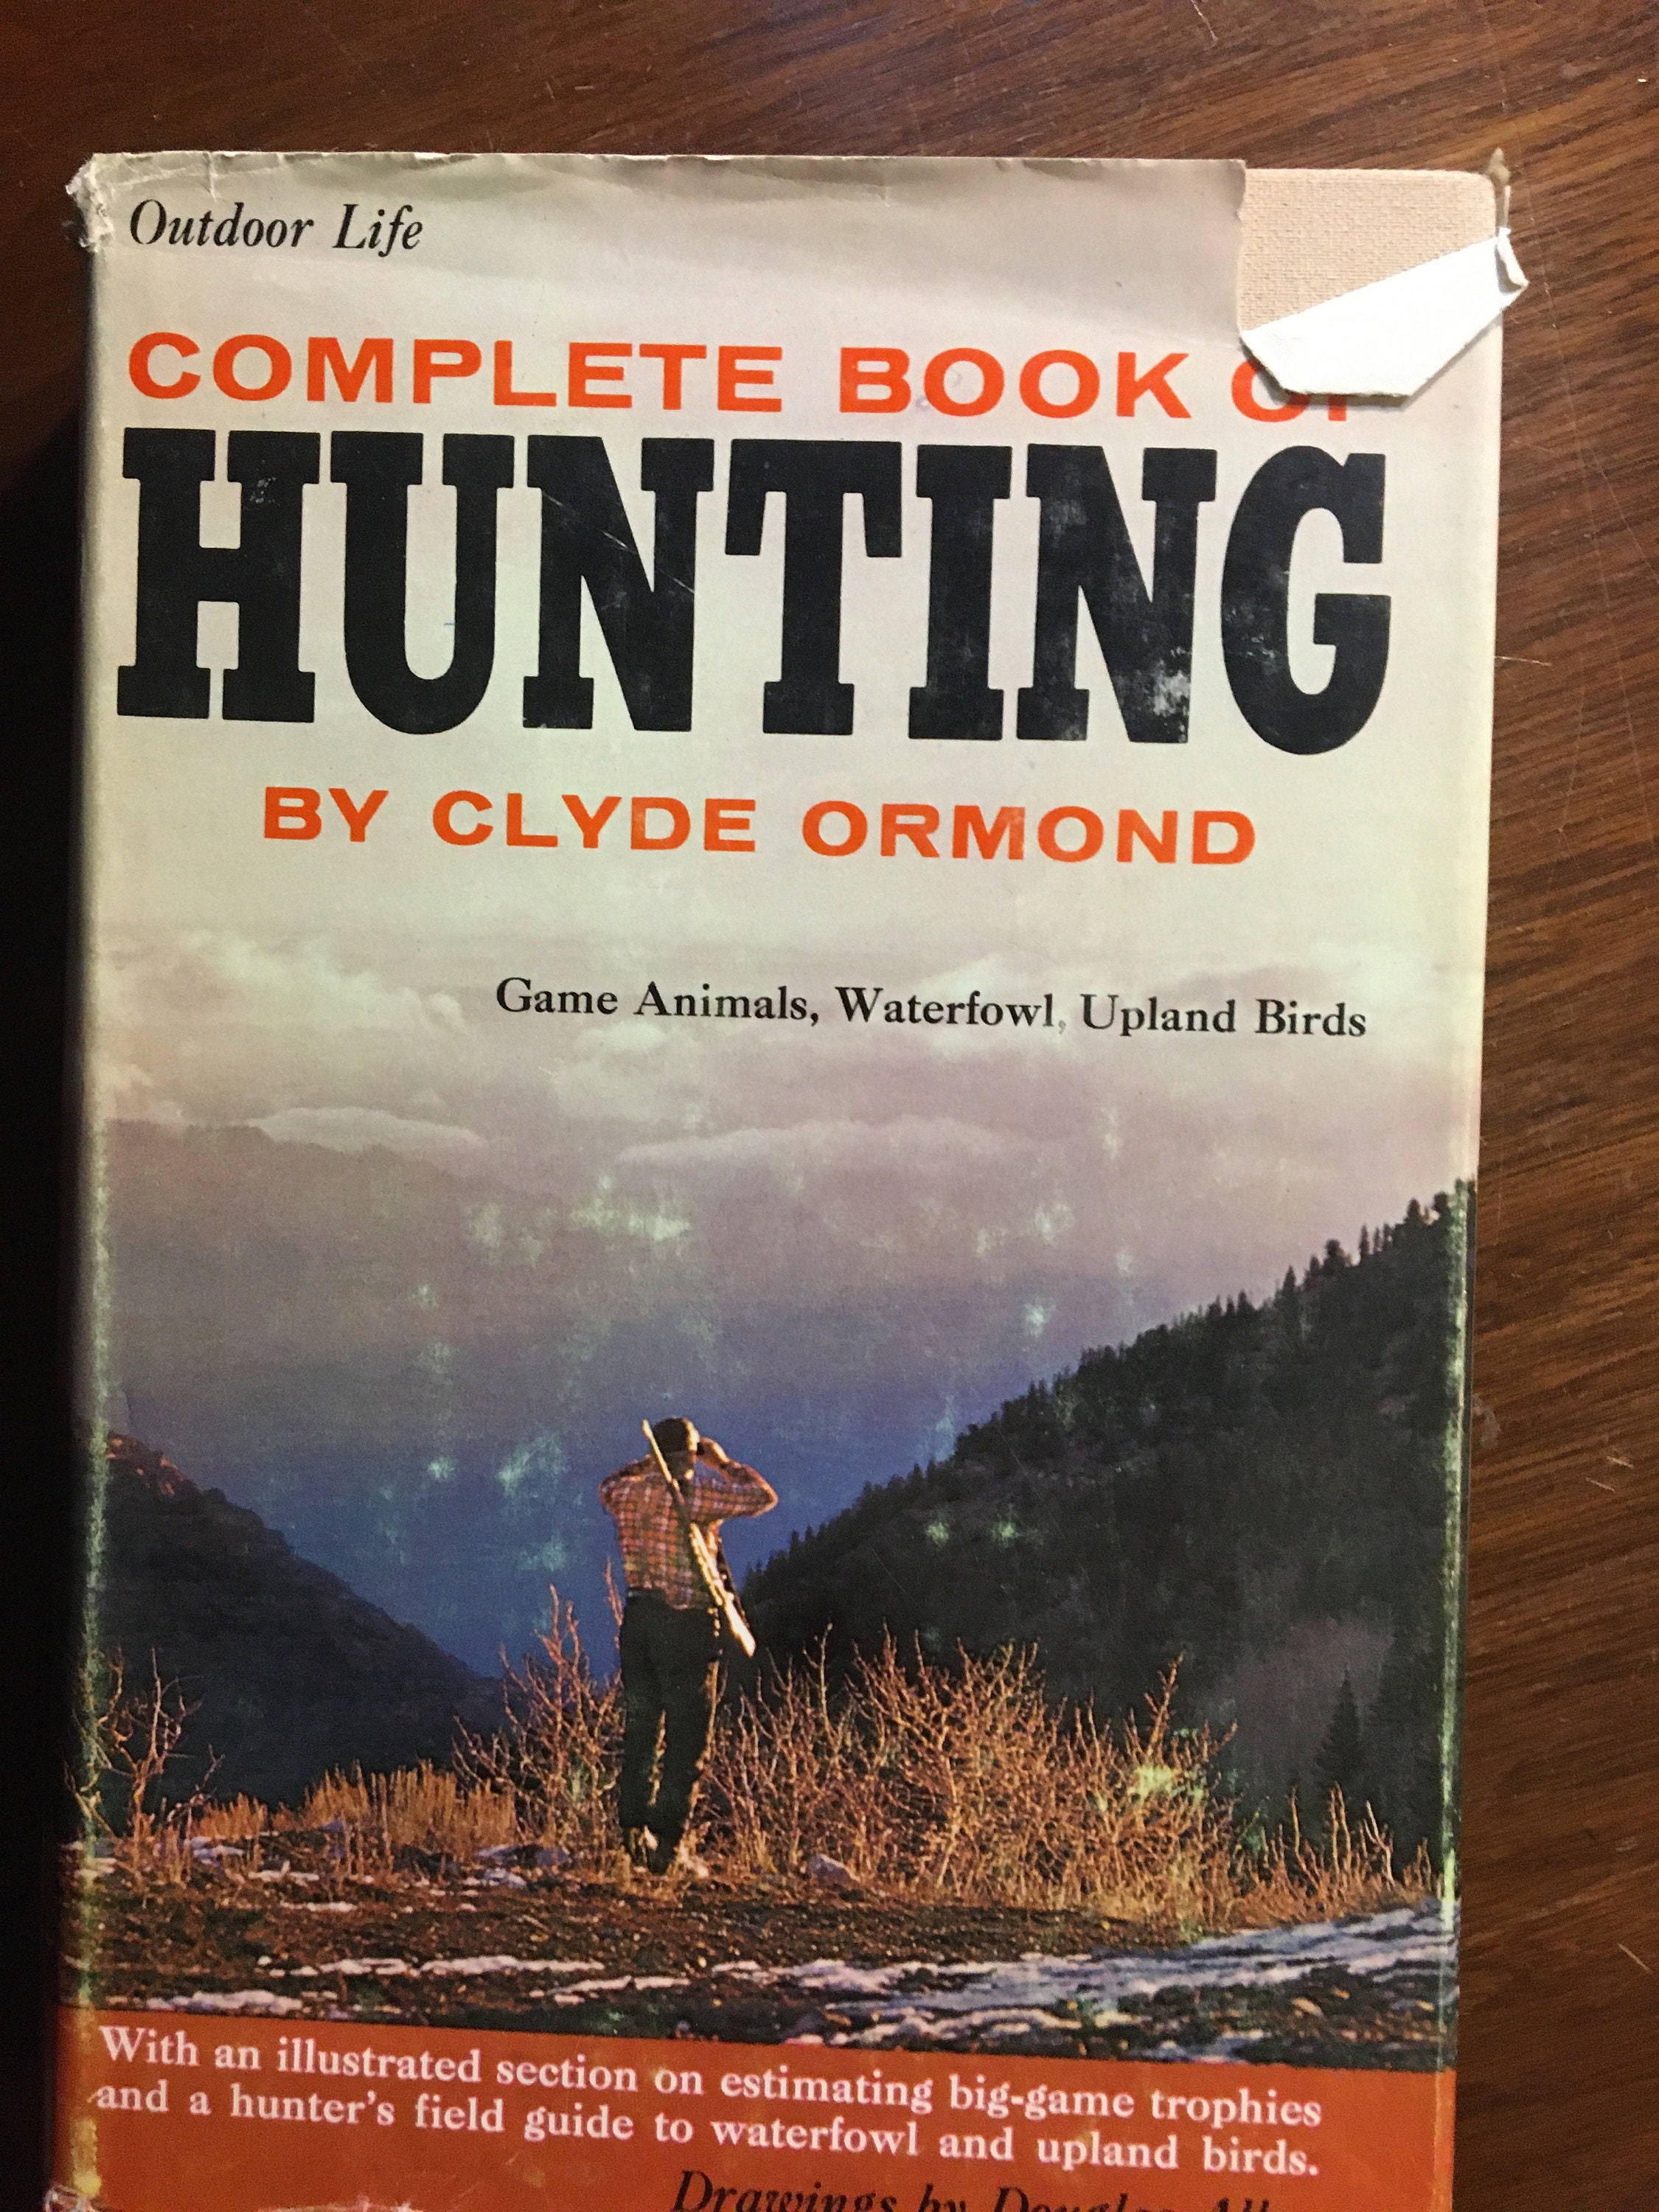 Hunting: Complete Book of Outdoor Life Clyde Ormond 1969 Tips